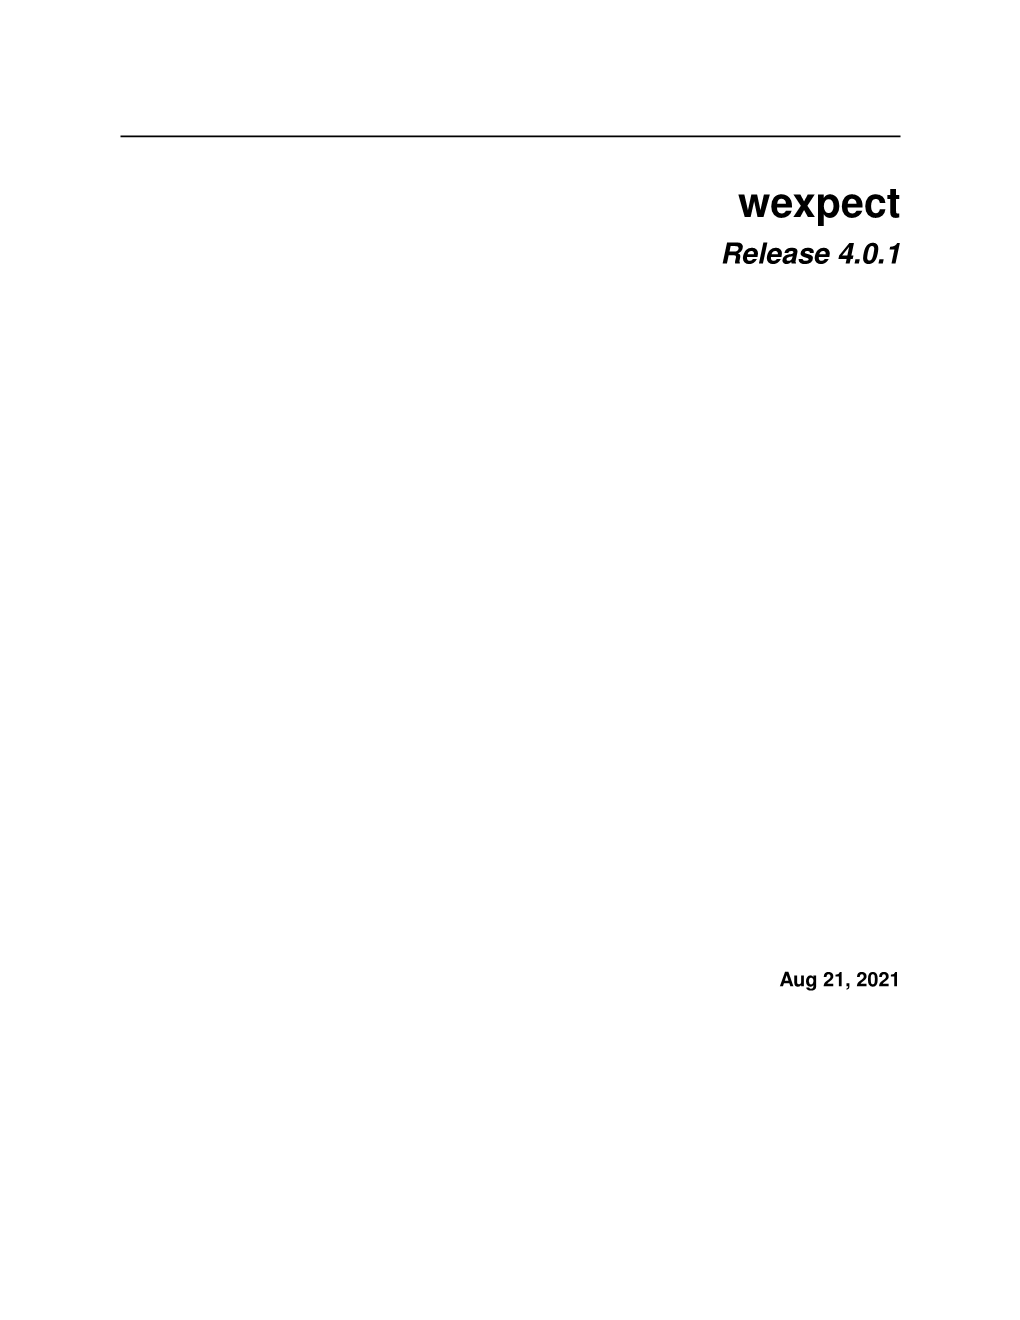 Wexpect Version 4.0.1